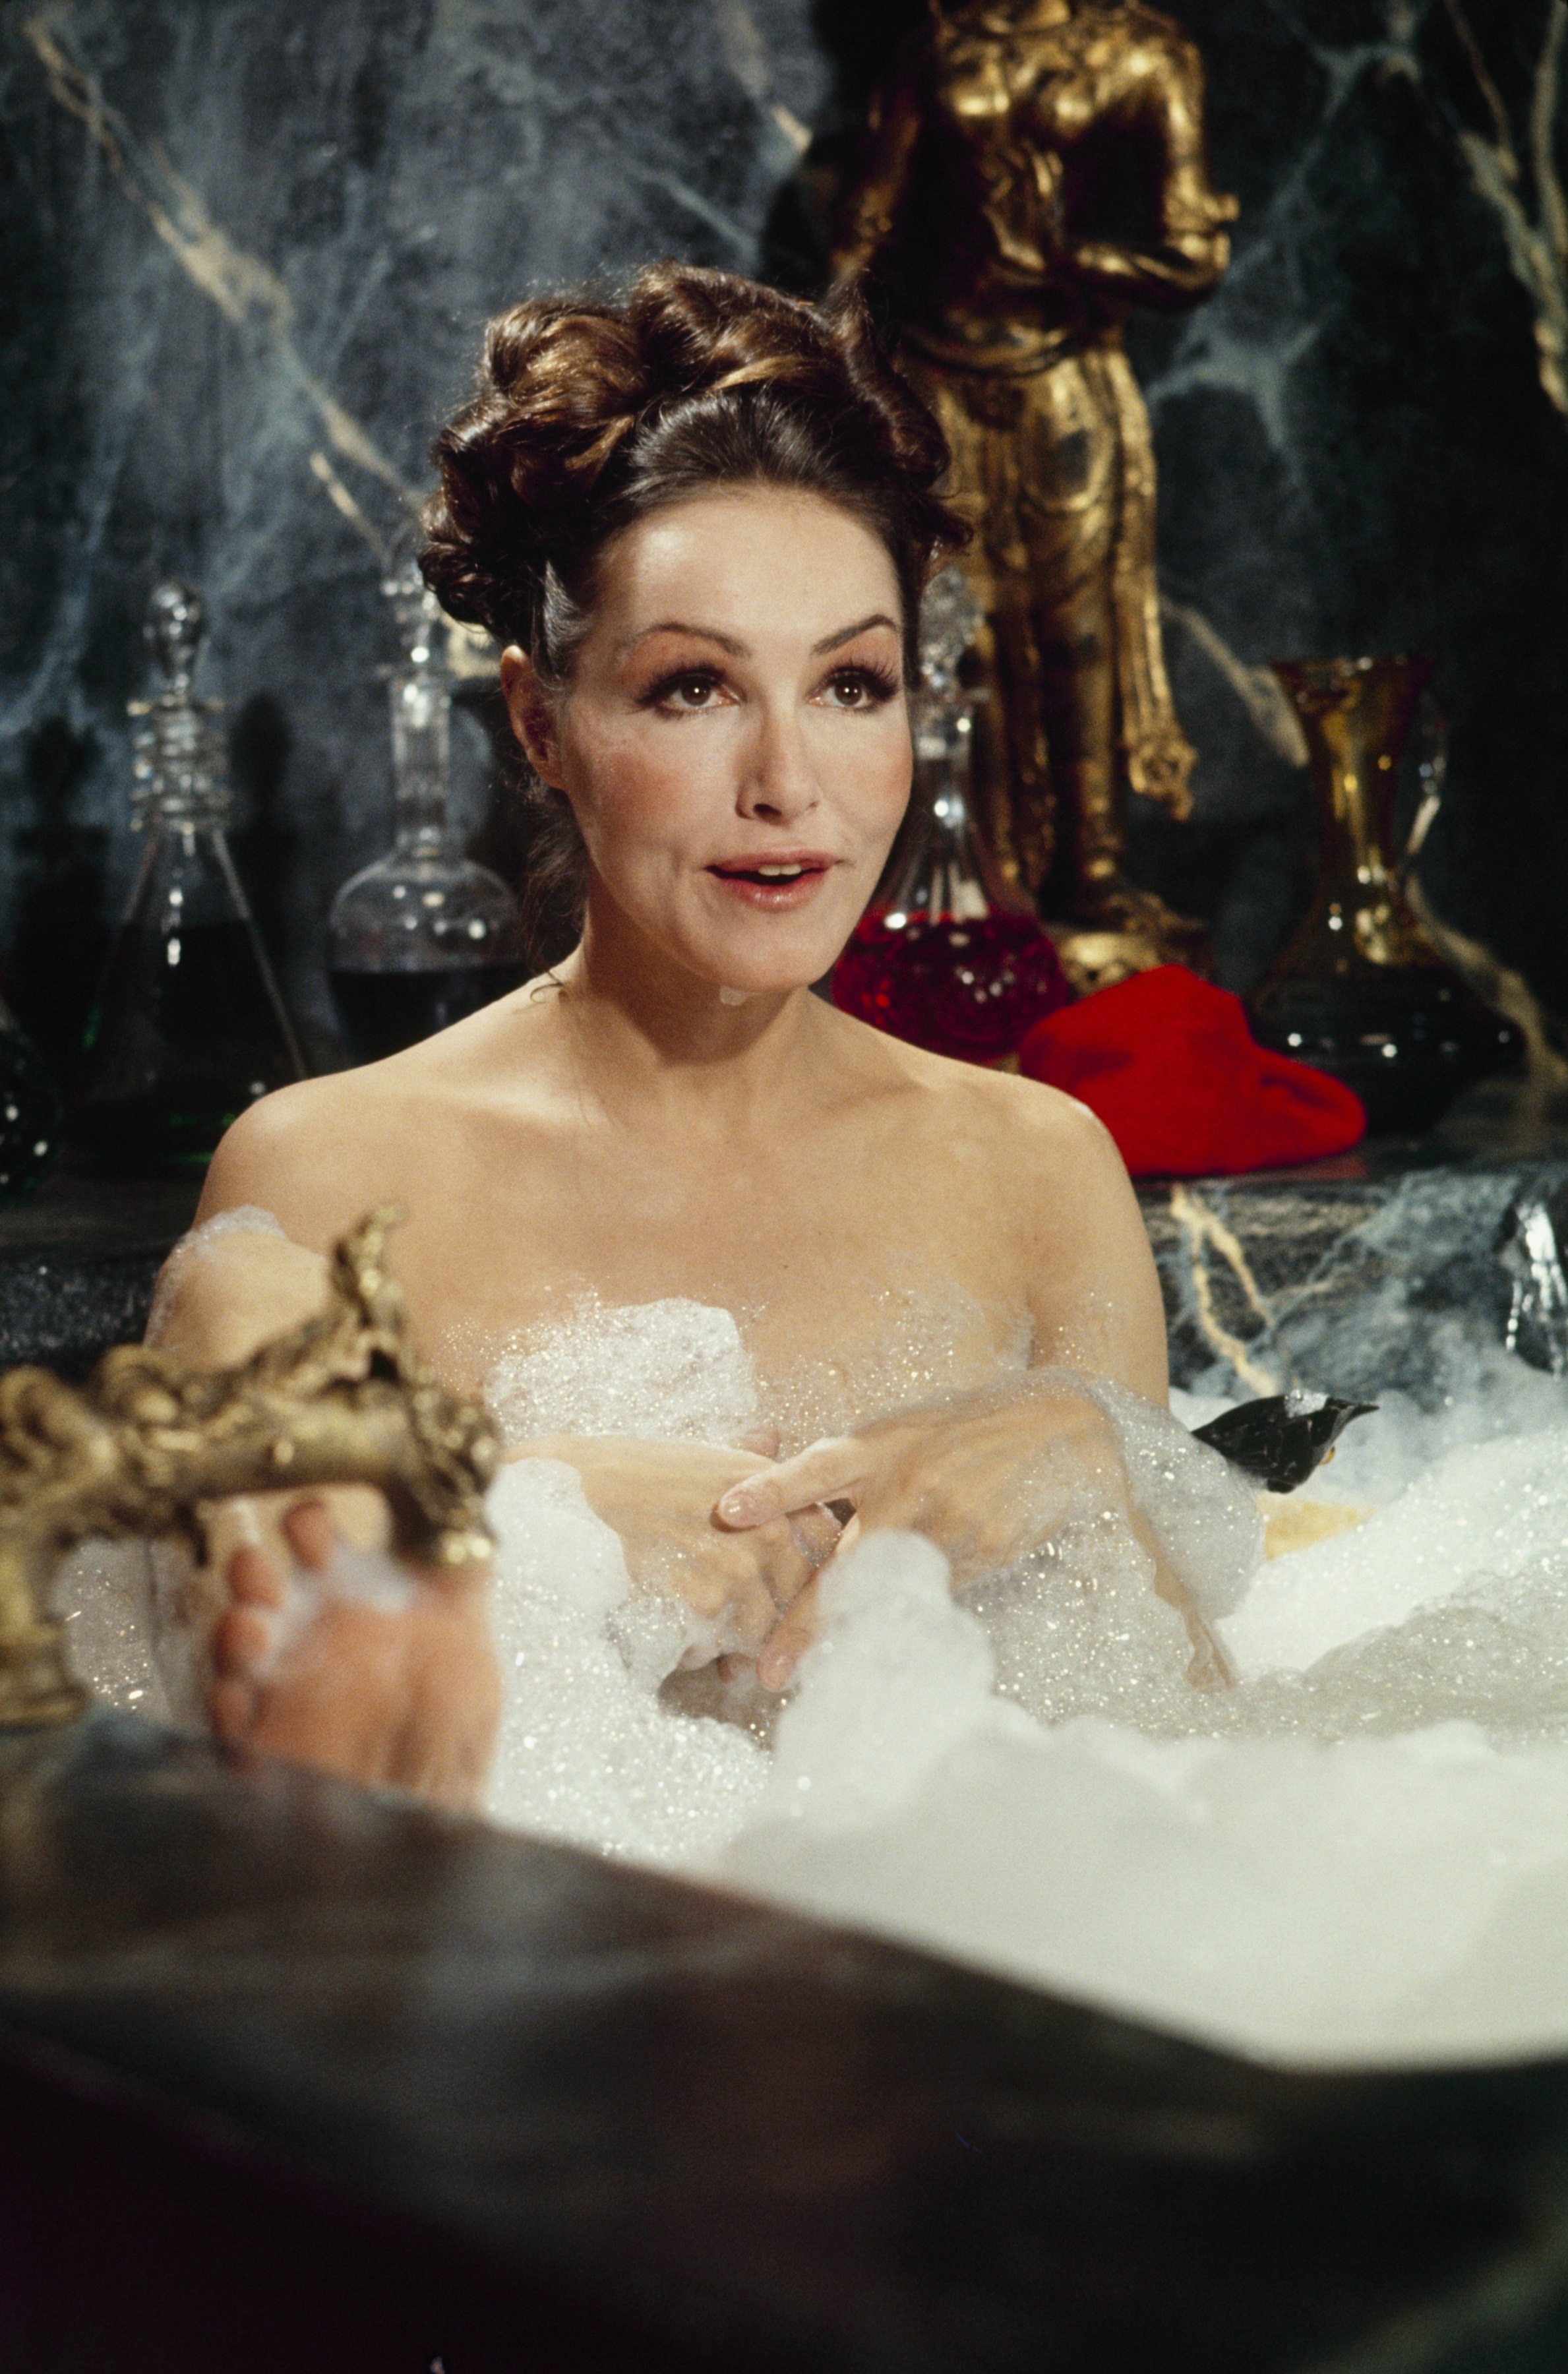 Julie Newmar poses in a bathtub for "Love and the Advice Column/Love and the Bathtub/Love and the Fullback/Love and the Guru/Love and the Physical" aired on January 21, 1972 | Source: Getty Images